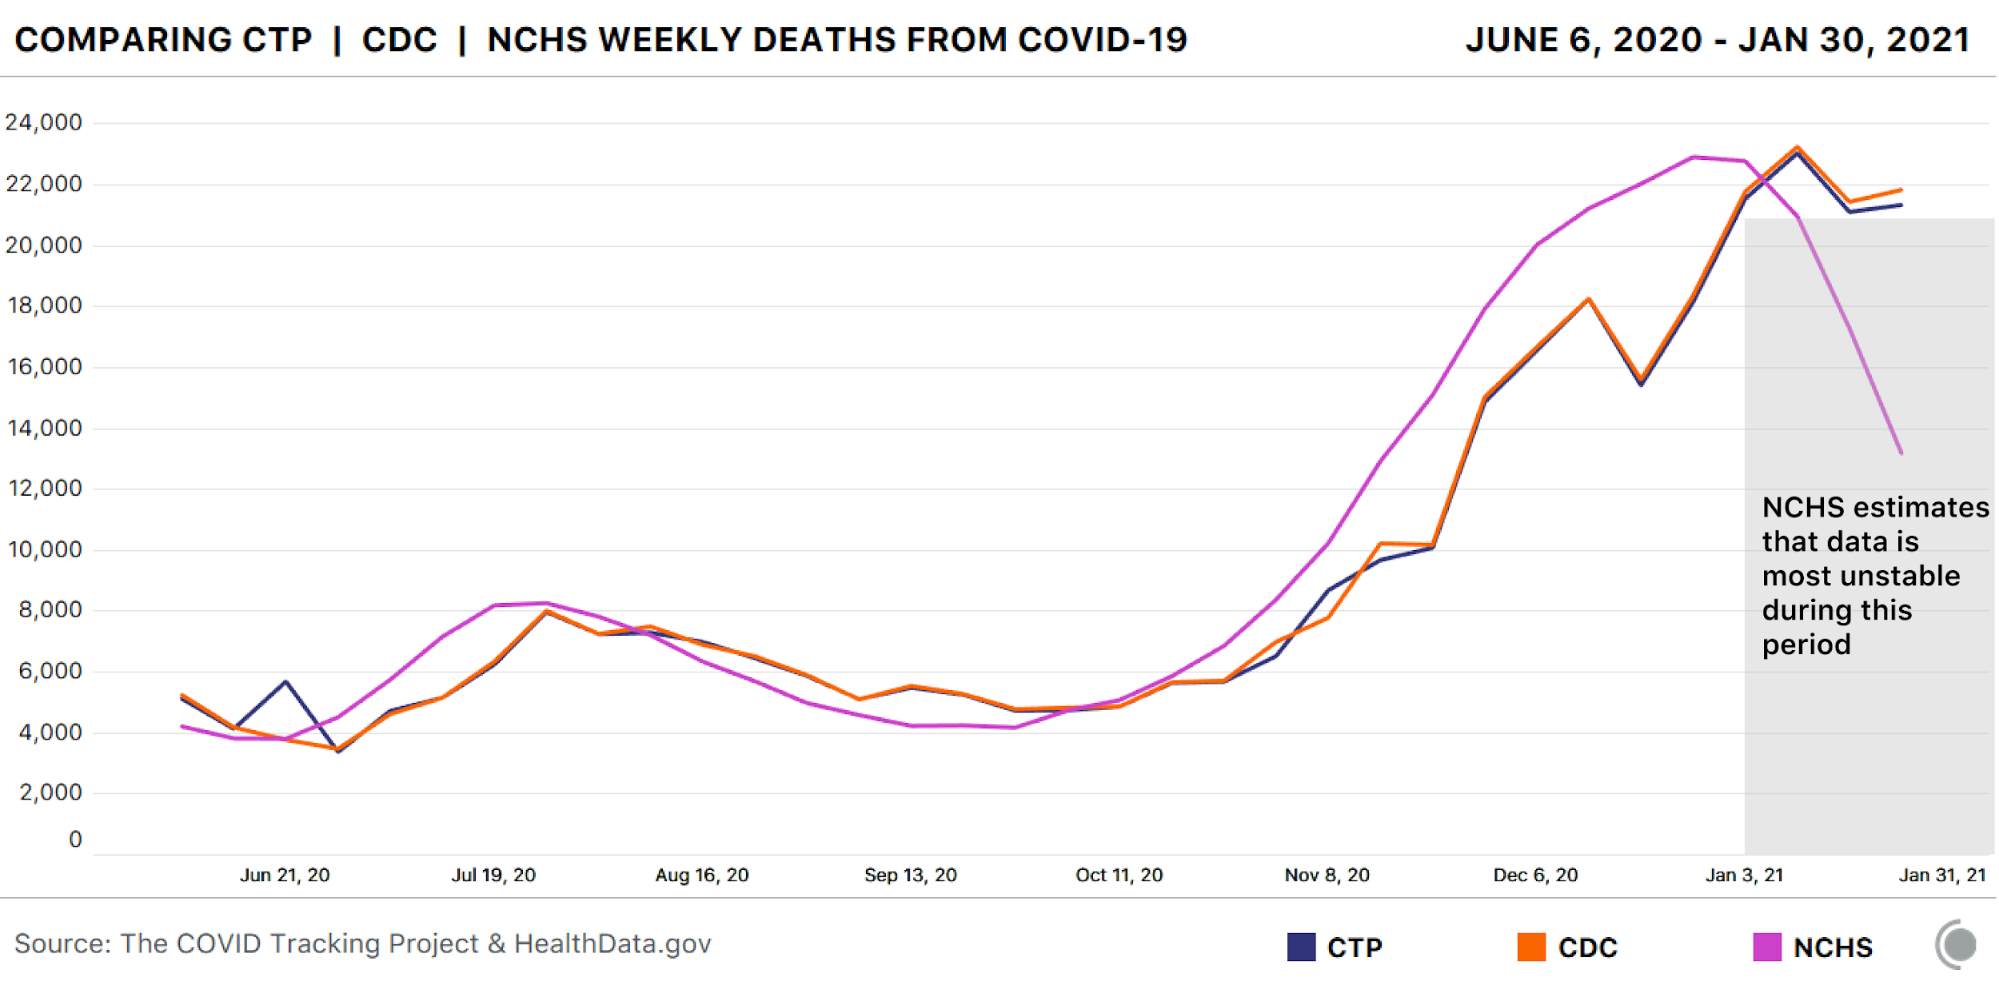 Comparison graph of US total death data from the NCHS, CDC COVID Data Tracker, and The COVID Tracking Project. Data from the CDC COVID Data Tracker almost perfectly matches COVID Tracking Project data, while the NCHS data follows the general trend but does not perfectly align. The NCHS data exhibits a taper because of the lag time in processing death certificates.